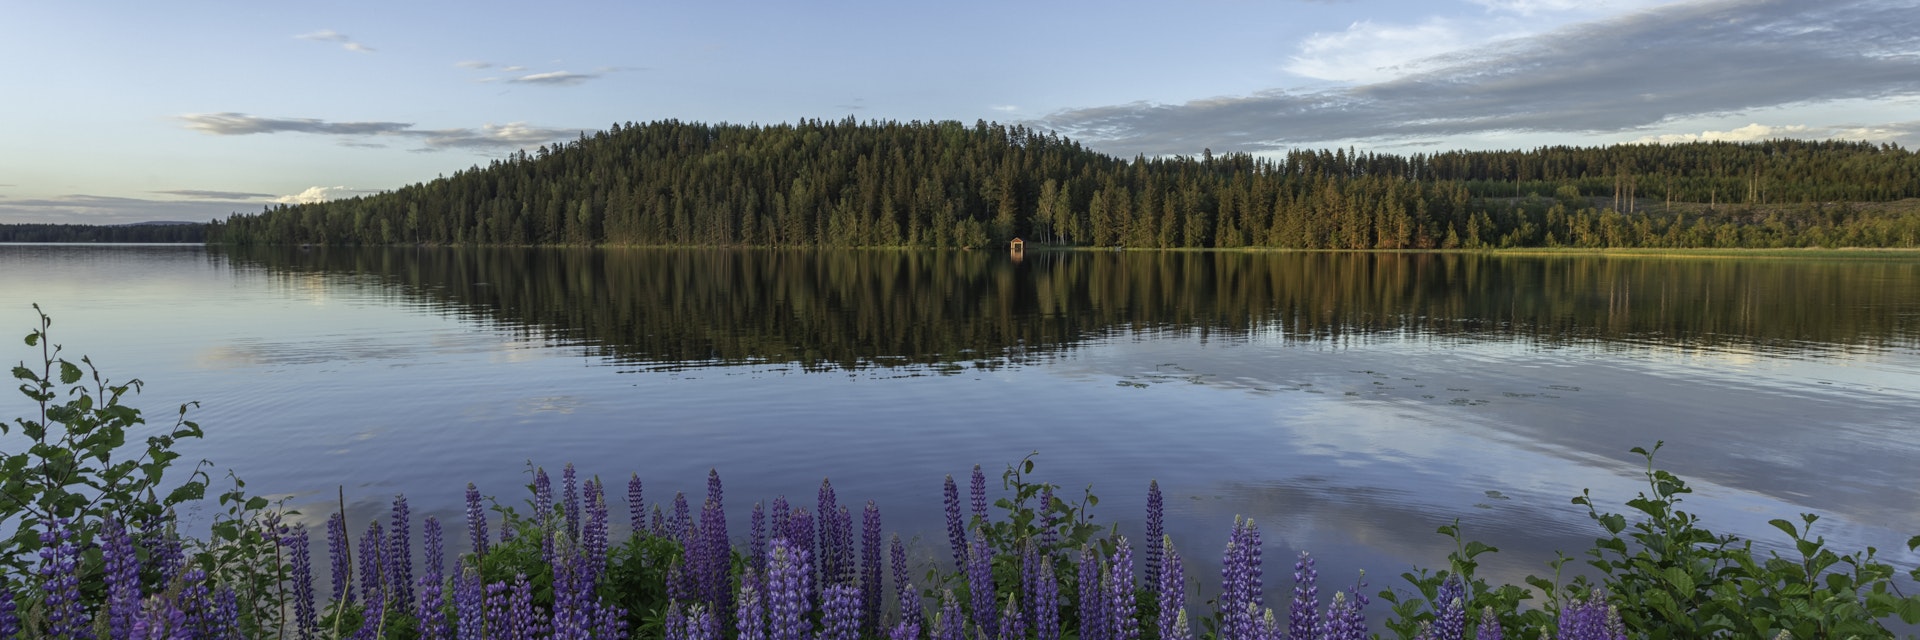 Lupines in bloom at the edge of a lake in Dalarna, Sweden, on a summer evening.